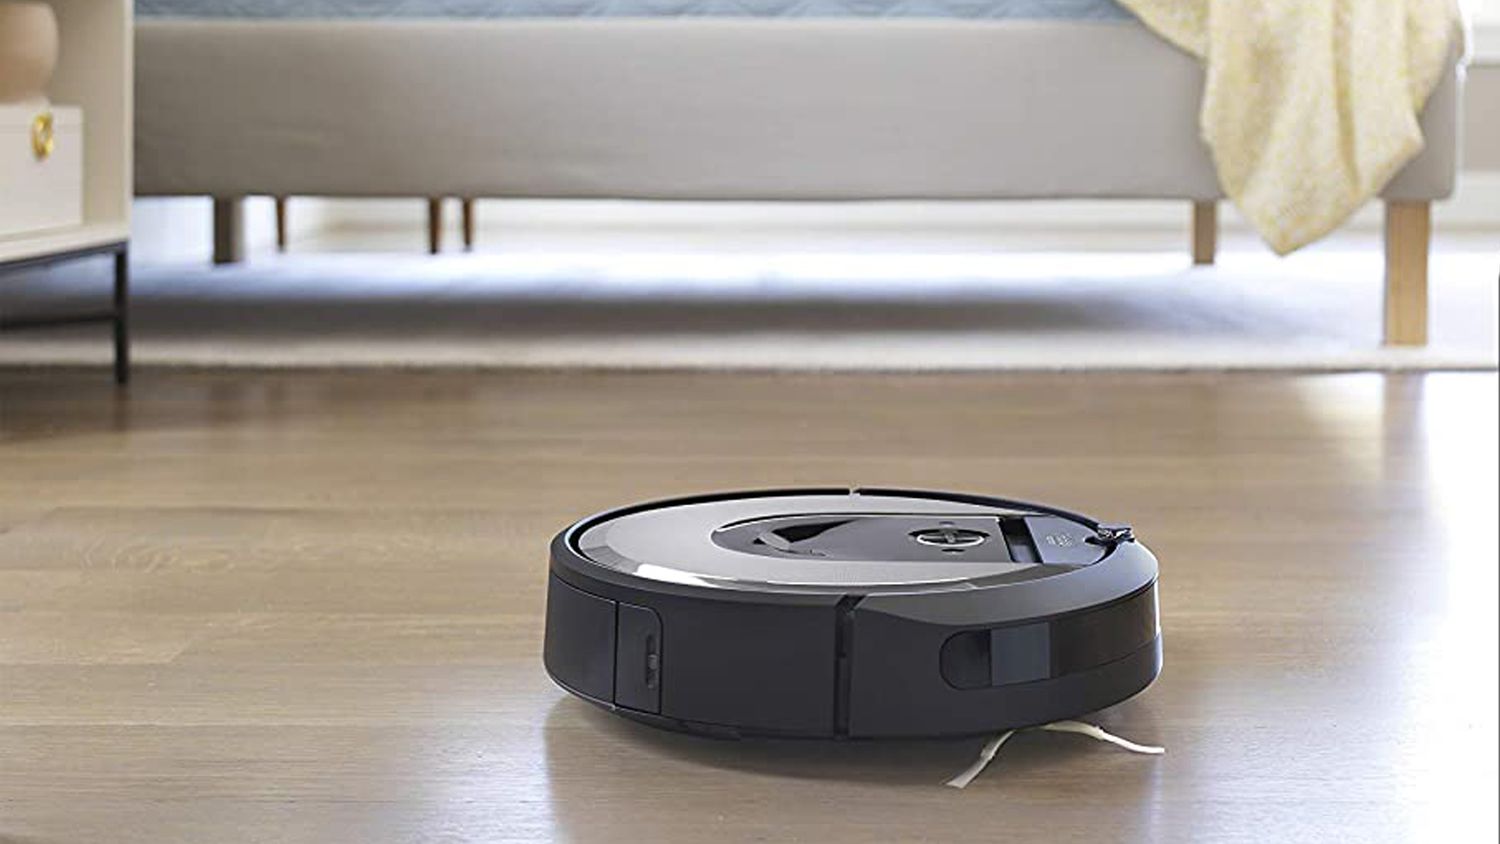 Best Robot Vacuums For Hardwood Floors, Best Vacuum For Tile And Wood Floors